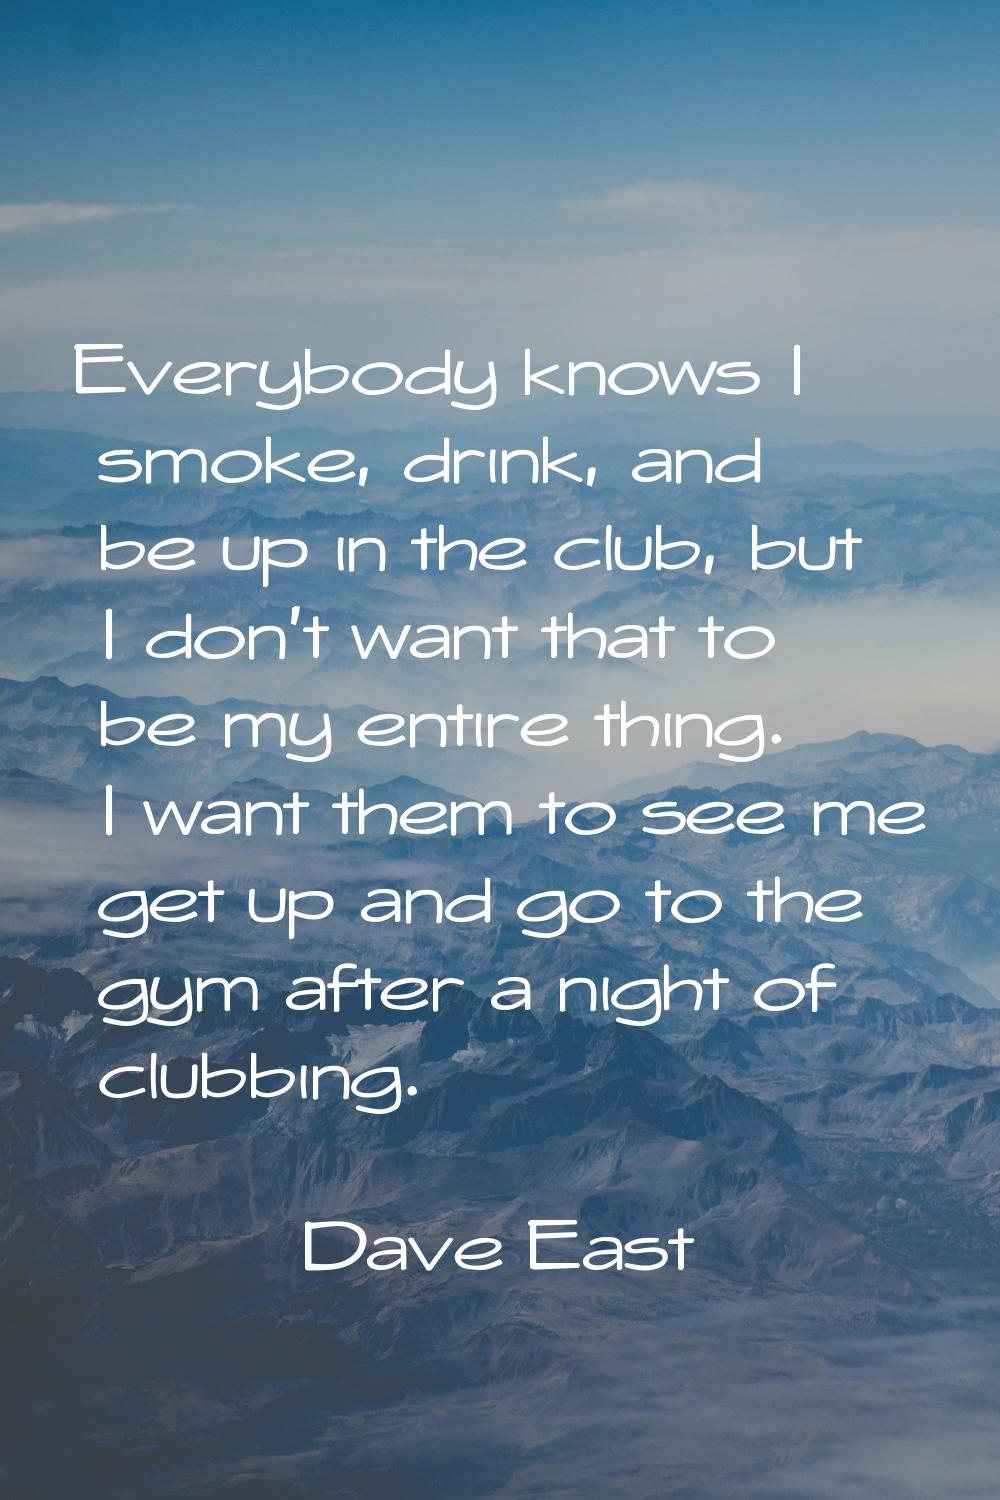 Everybody knows I smoke, drink, and be up in the club, but I don't want that to be my entire thing.